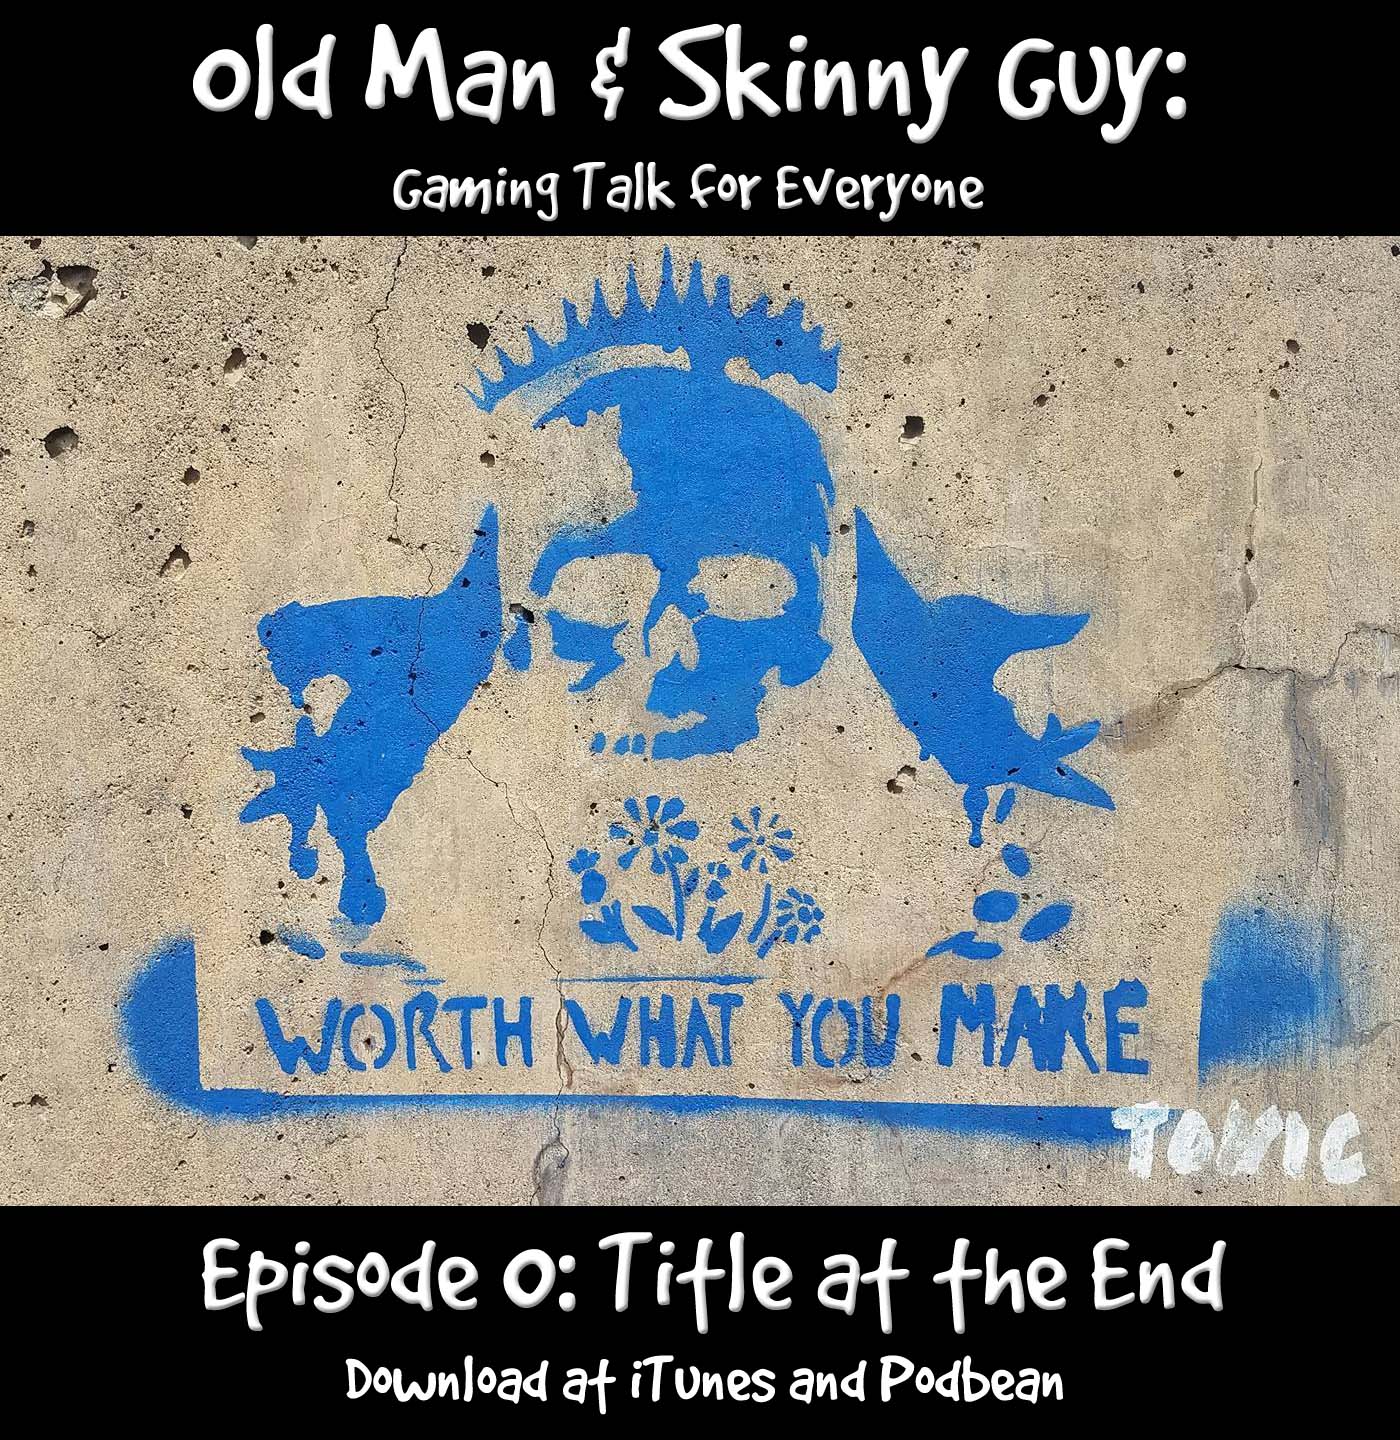 Episode 0: Title At the End